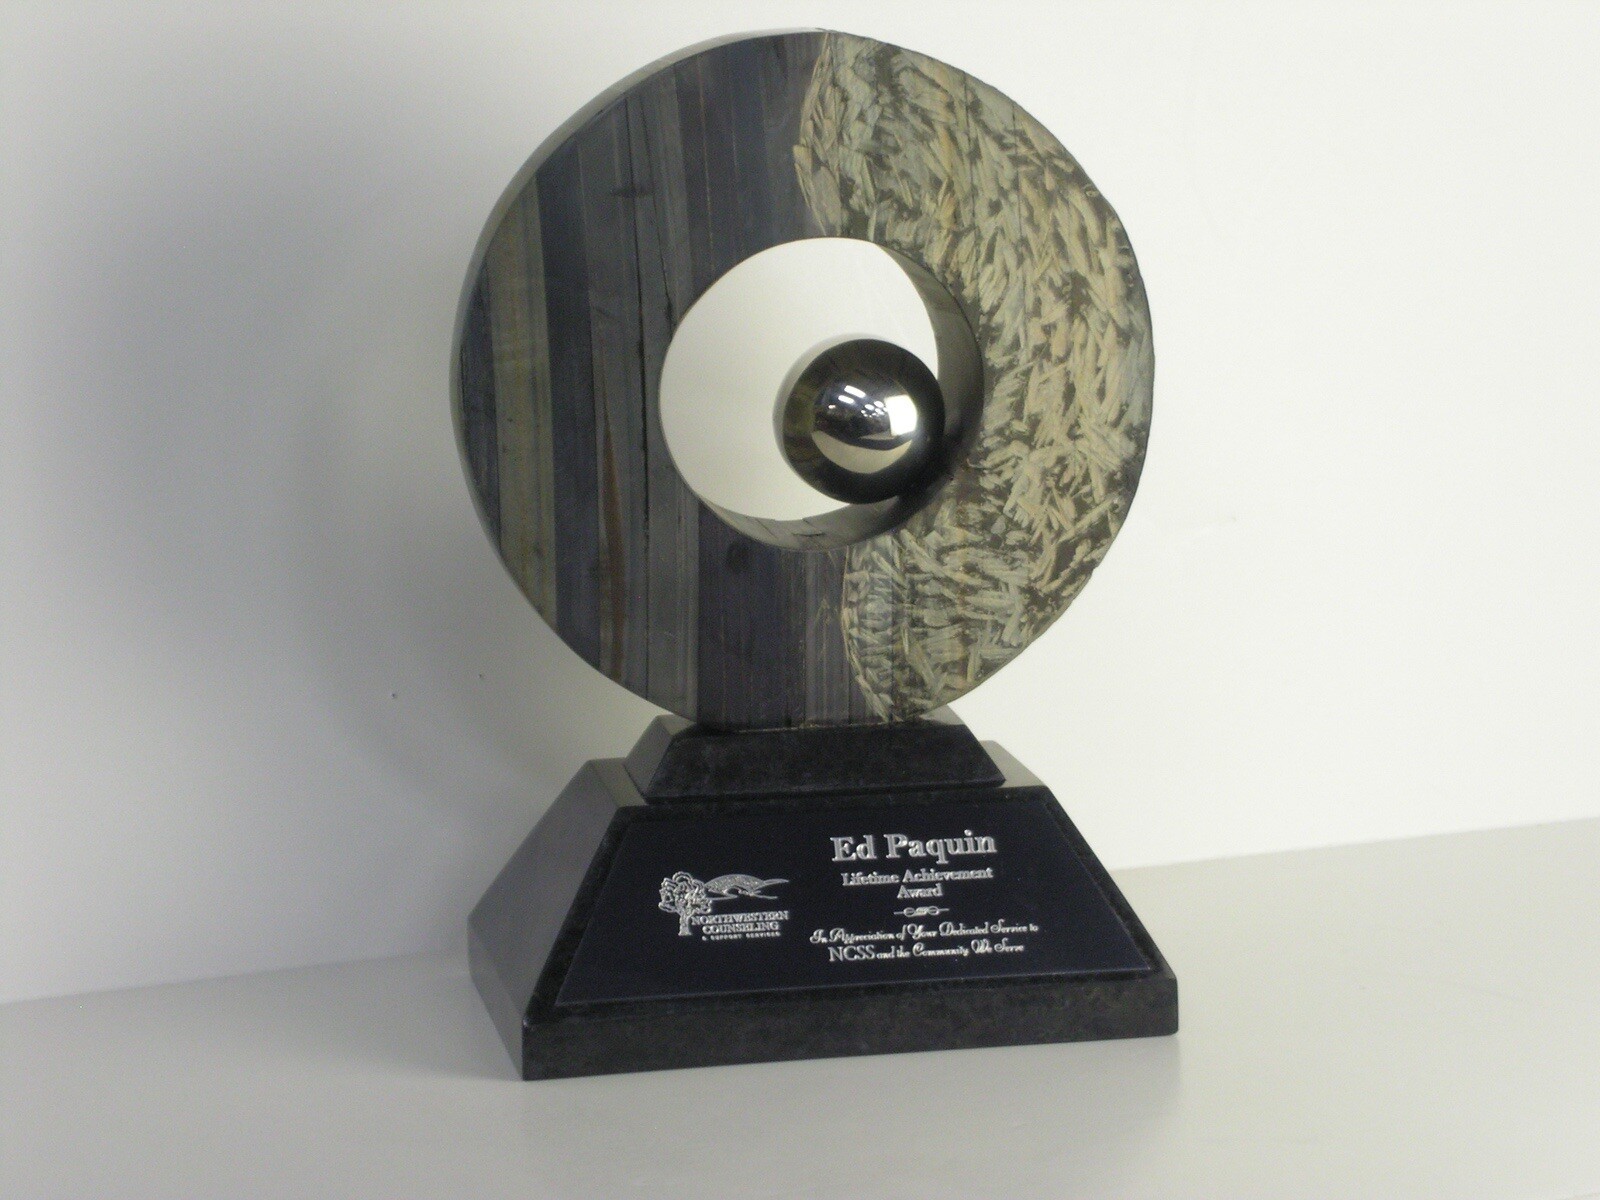 Stone and Metal Award in 2 Sizes